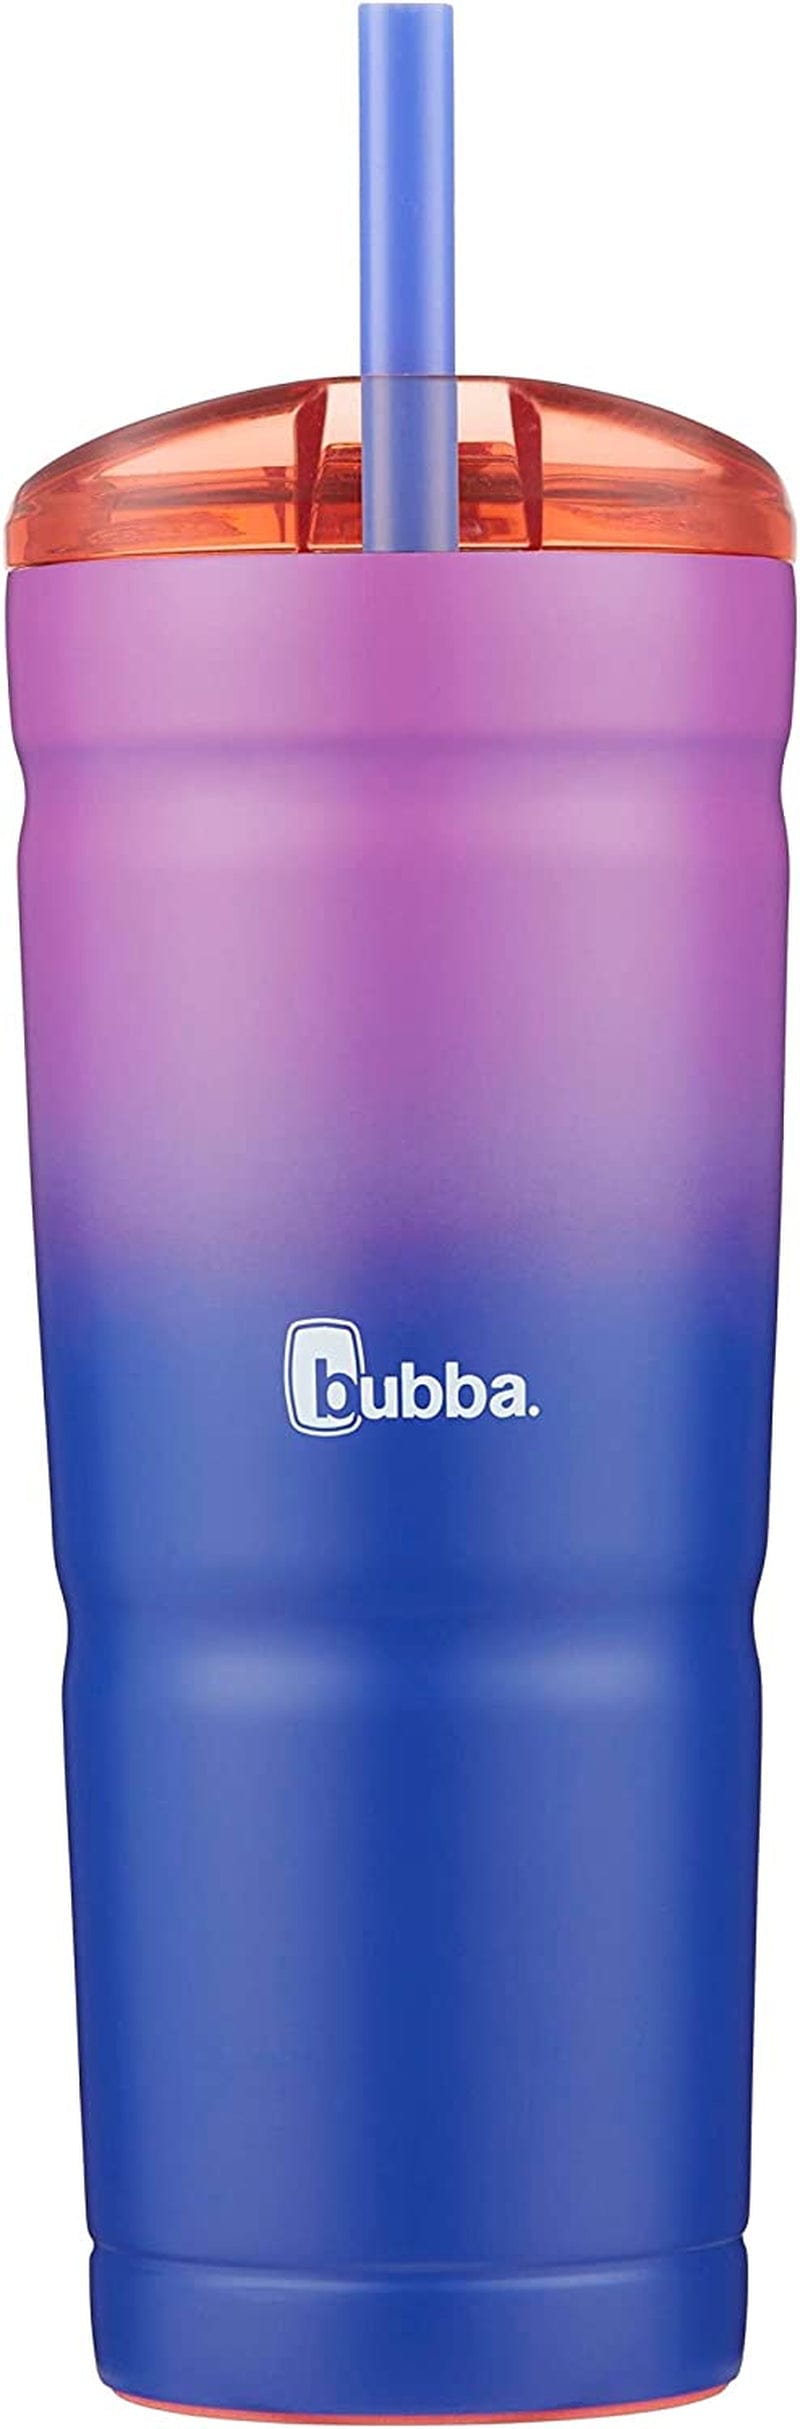 Bubba Straw Envy Vacuum-Insulated Stainless Steel Tumbler, 24 Oz., Island Teal Lid Home & Garden > Kitchen & Dining > Tableware > Drinkware BUBBA BRANDS Vineyard 24oz 